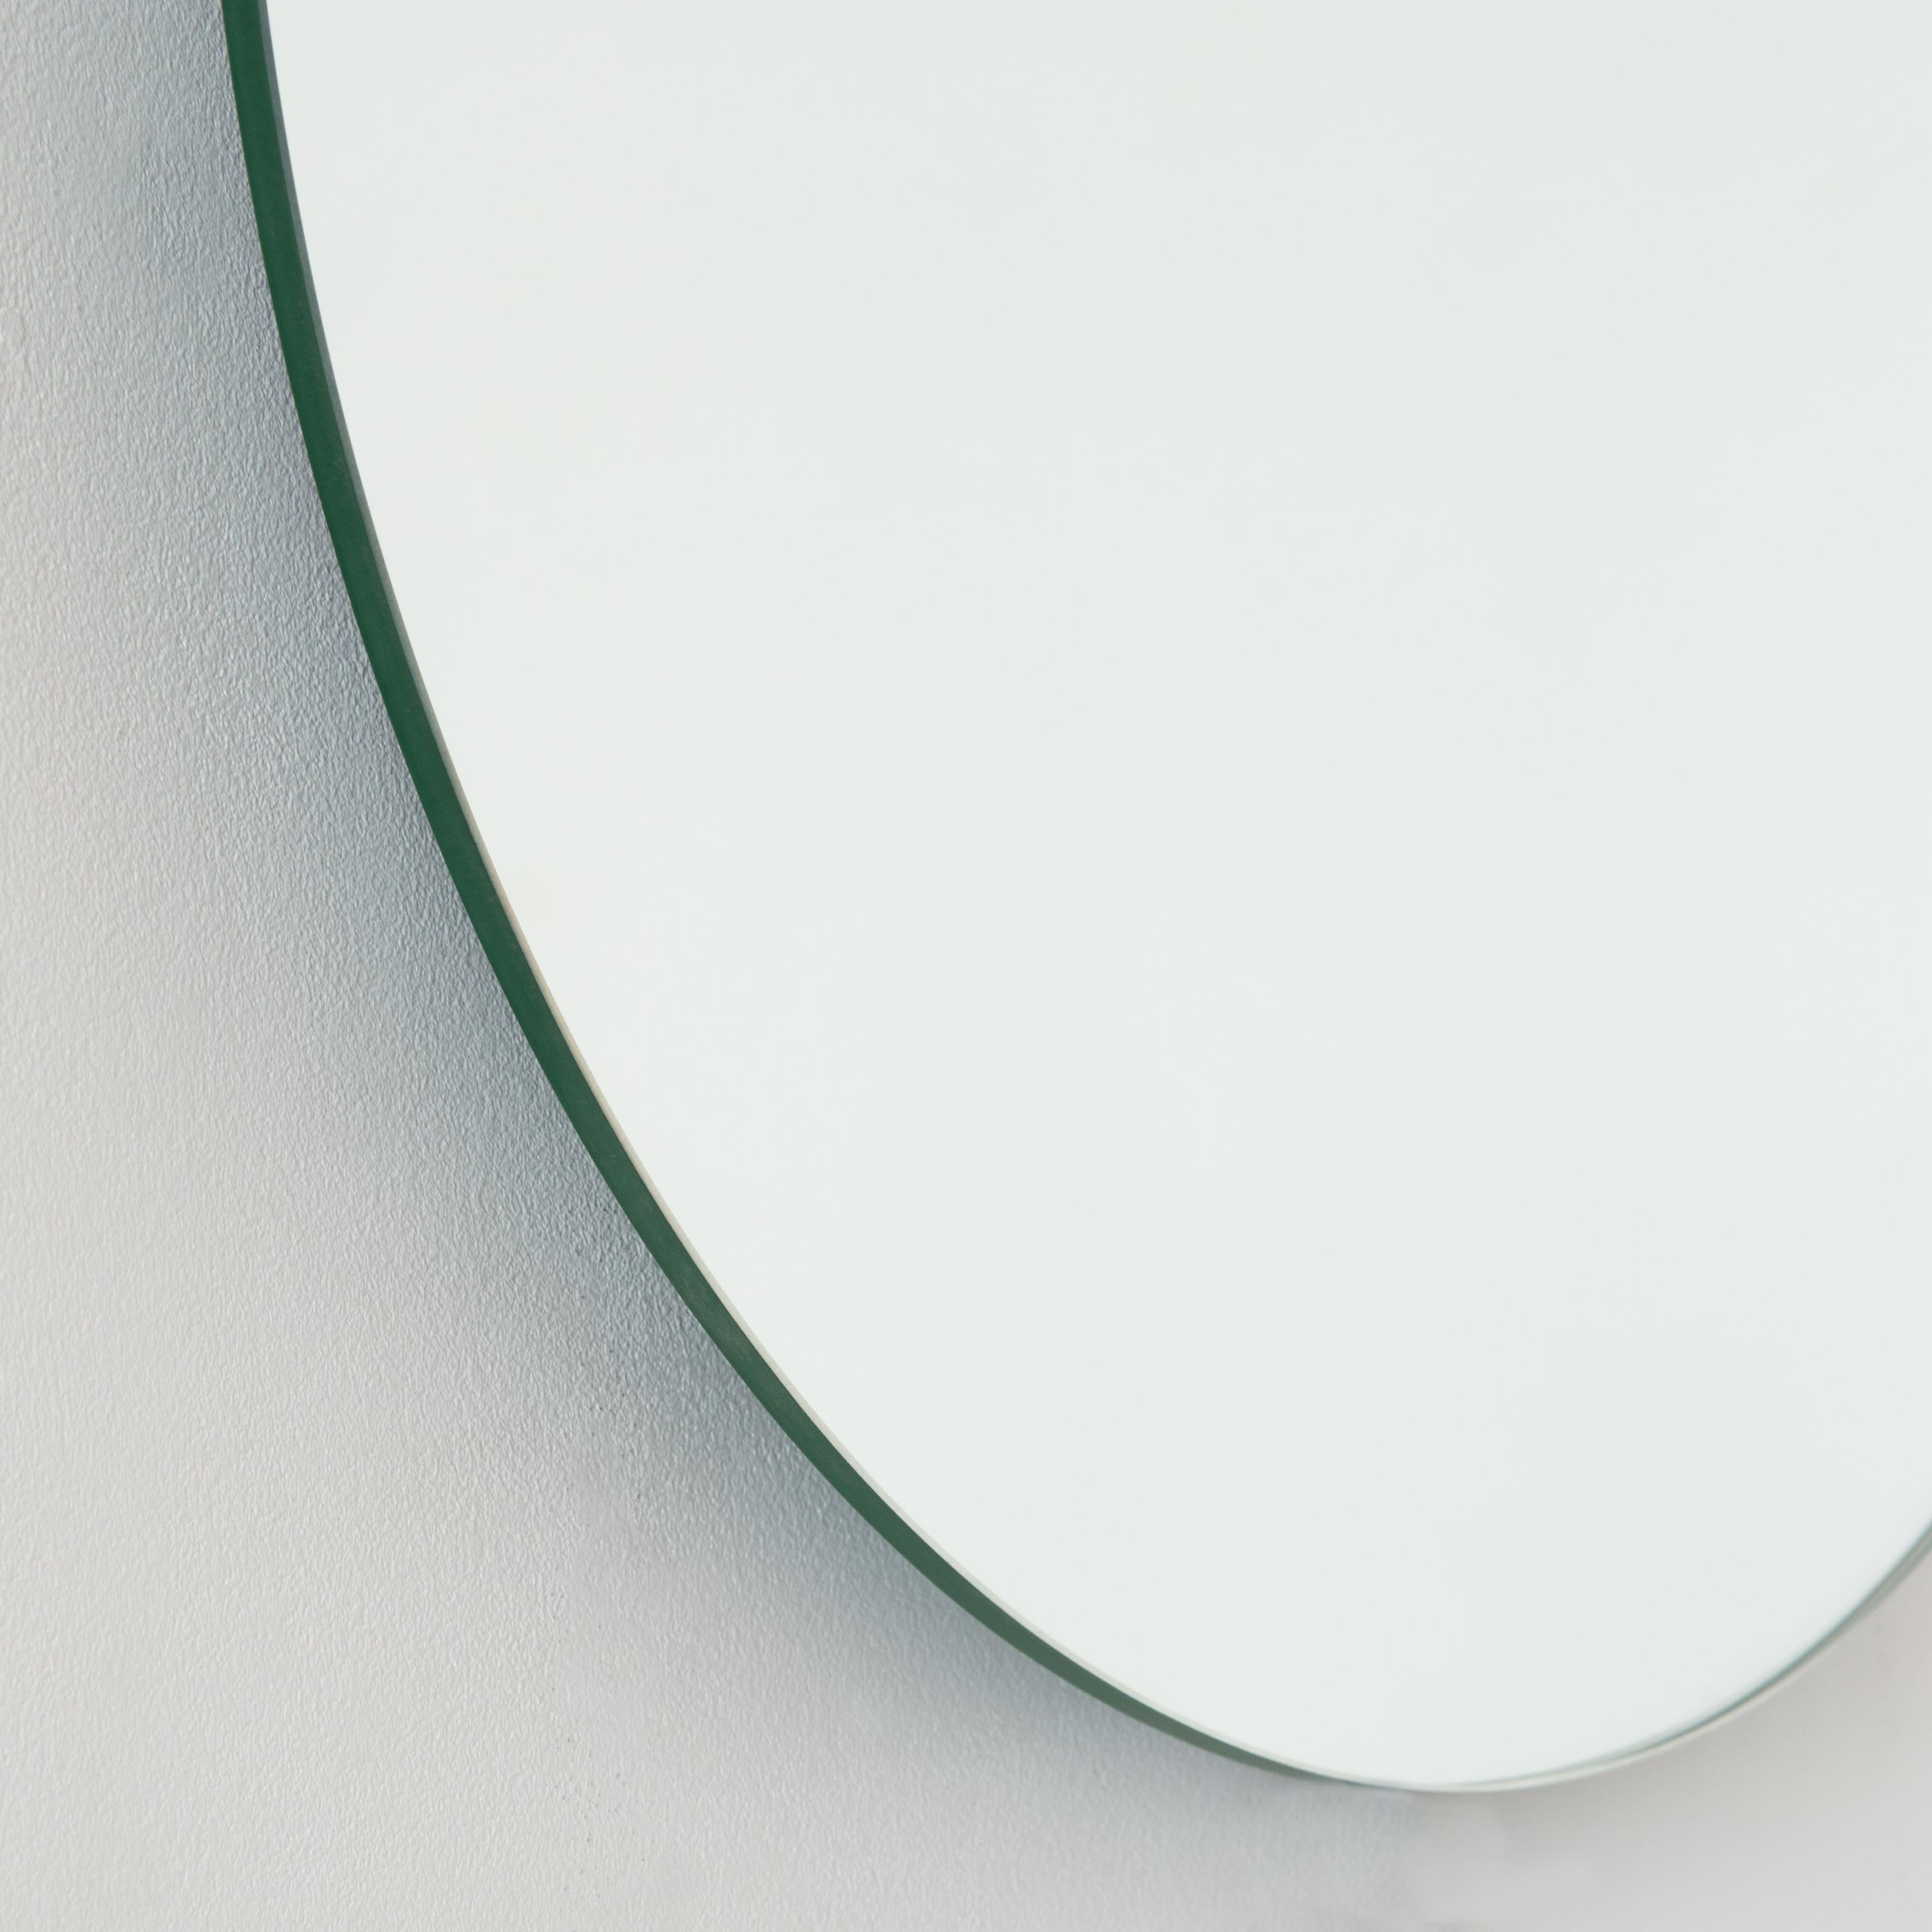 Orbis Back Illuminated Round Contemporary Frameless Mirror, Customisable, Large For Sale 4